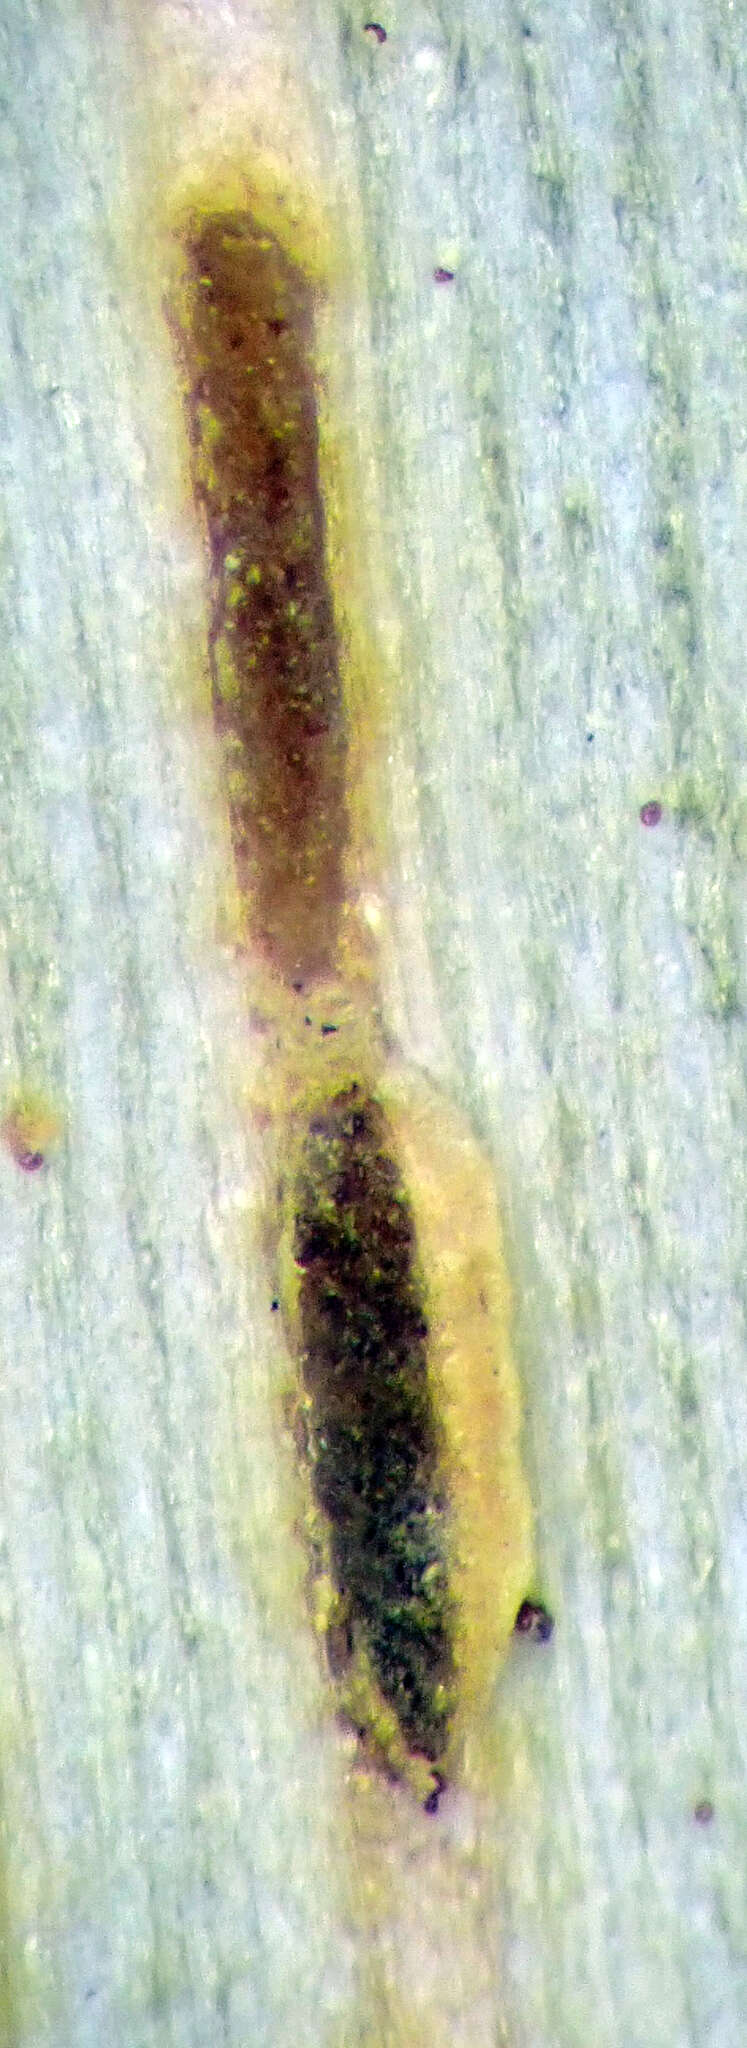 Image of Puccinia chathamica McKenzie 2008